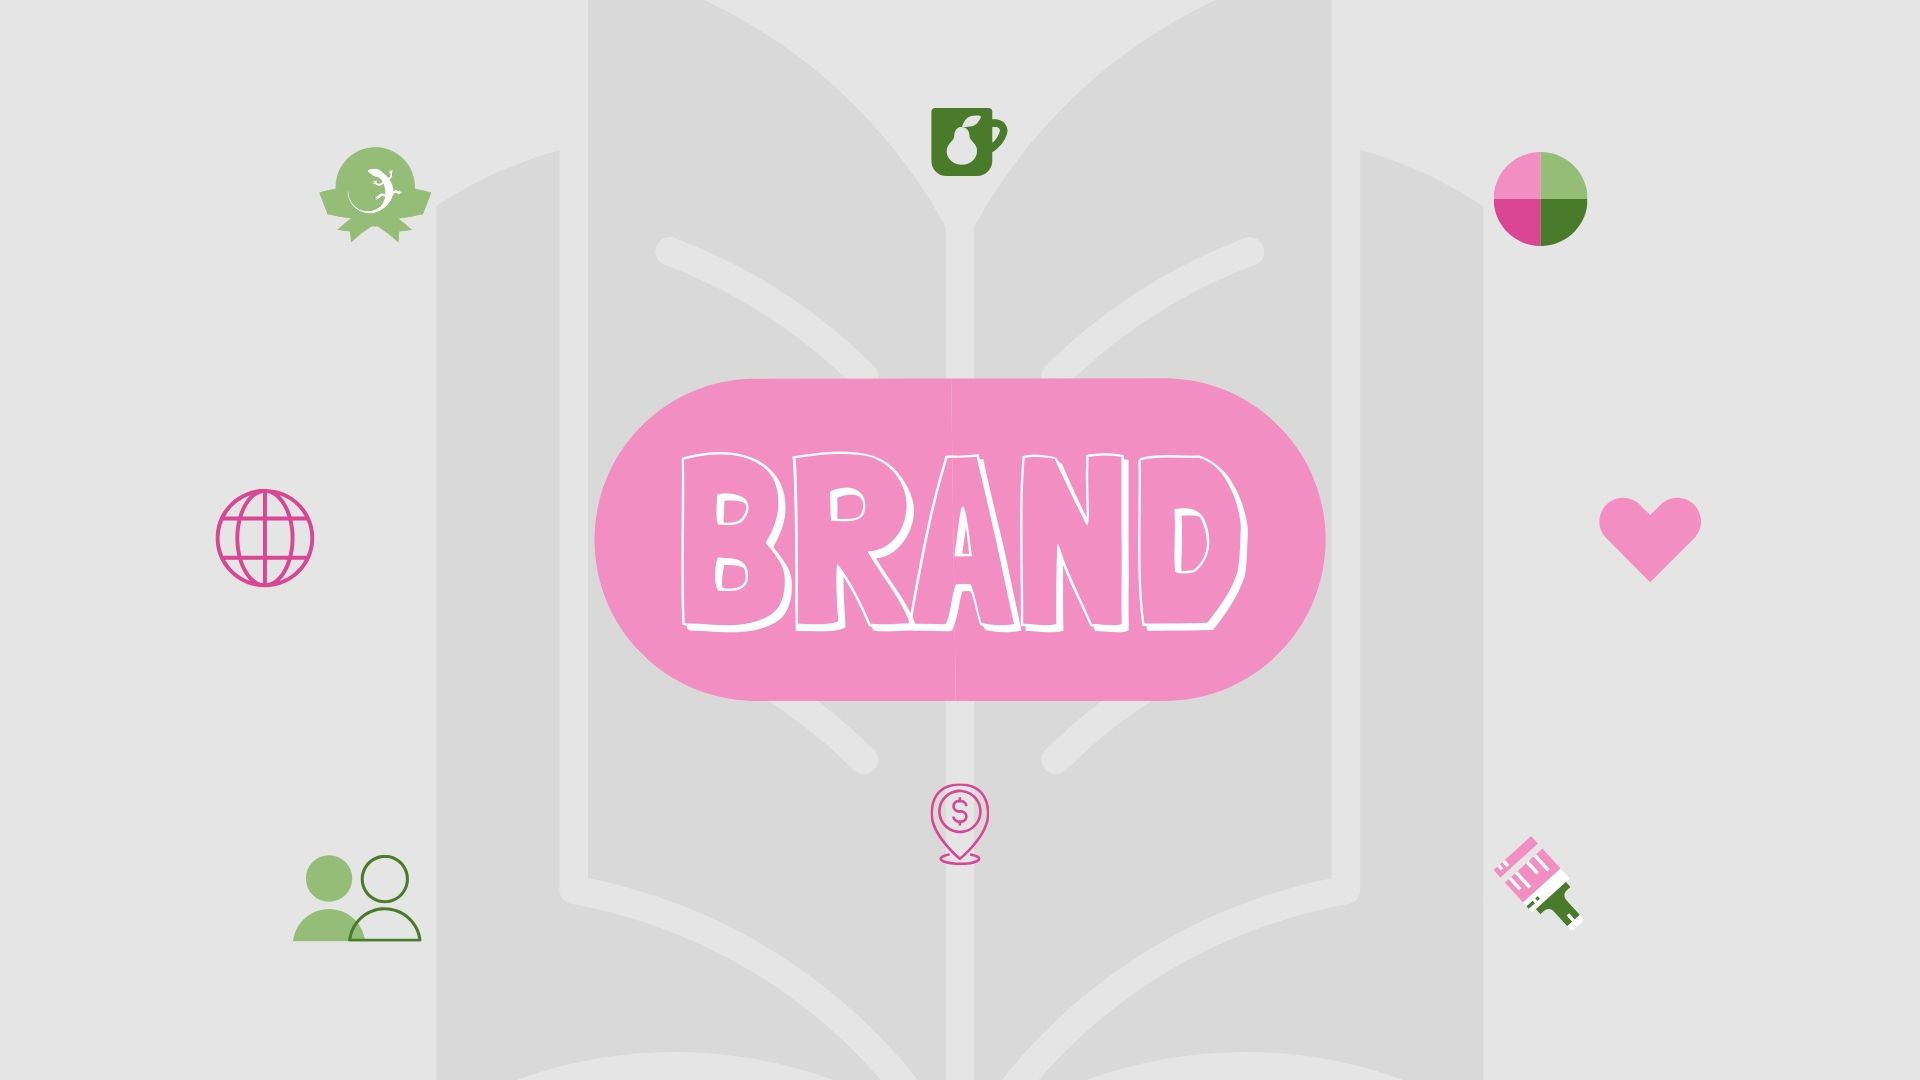 Brand Story: Free Branding Course With Certificate On How To Build A Brand